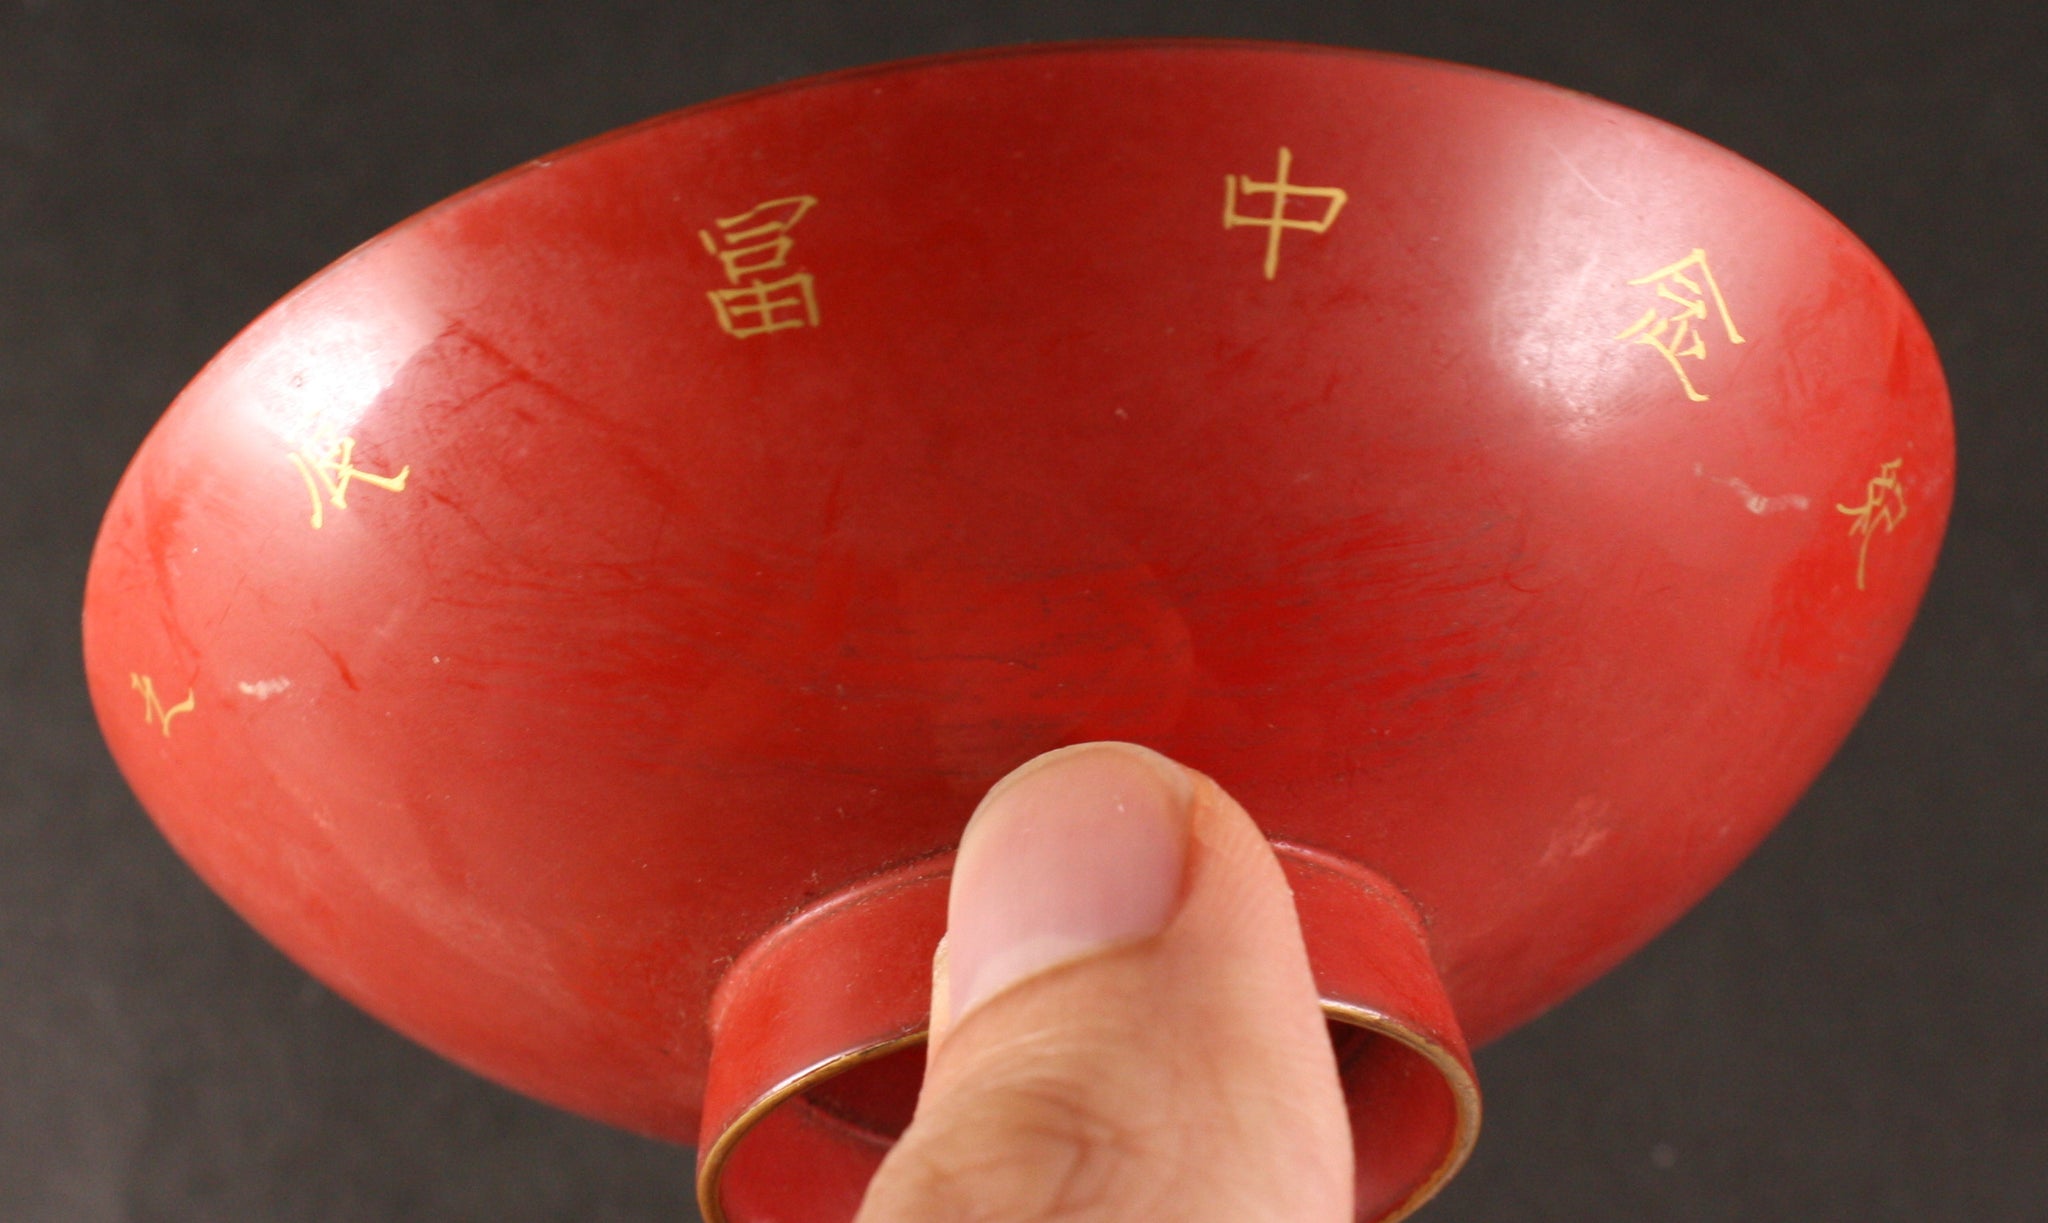 Stunning Antique Japanese Military Boxer Rebellion 8 Nations Allied Army Lacquer Sake Cup